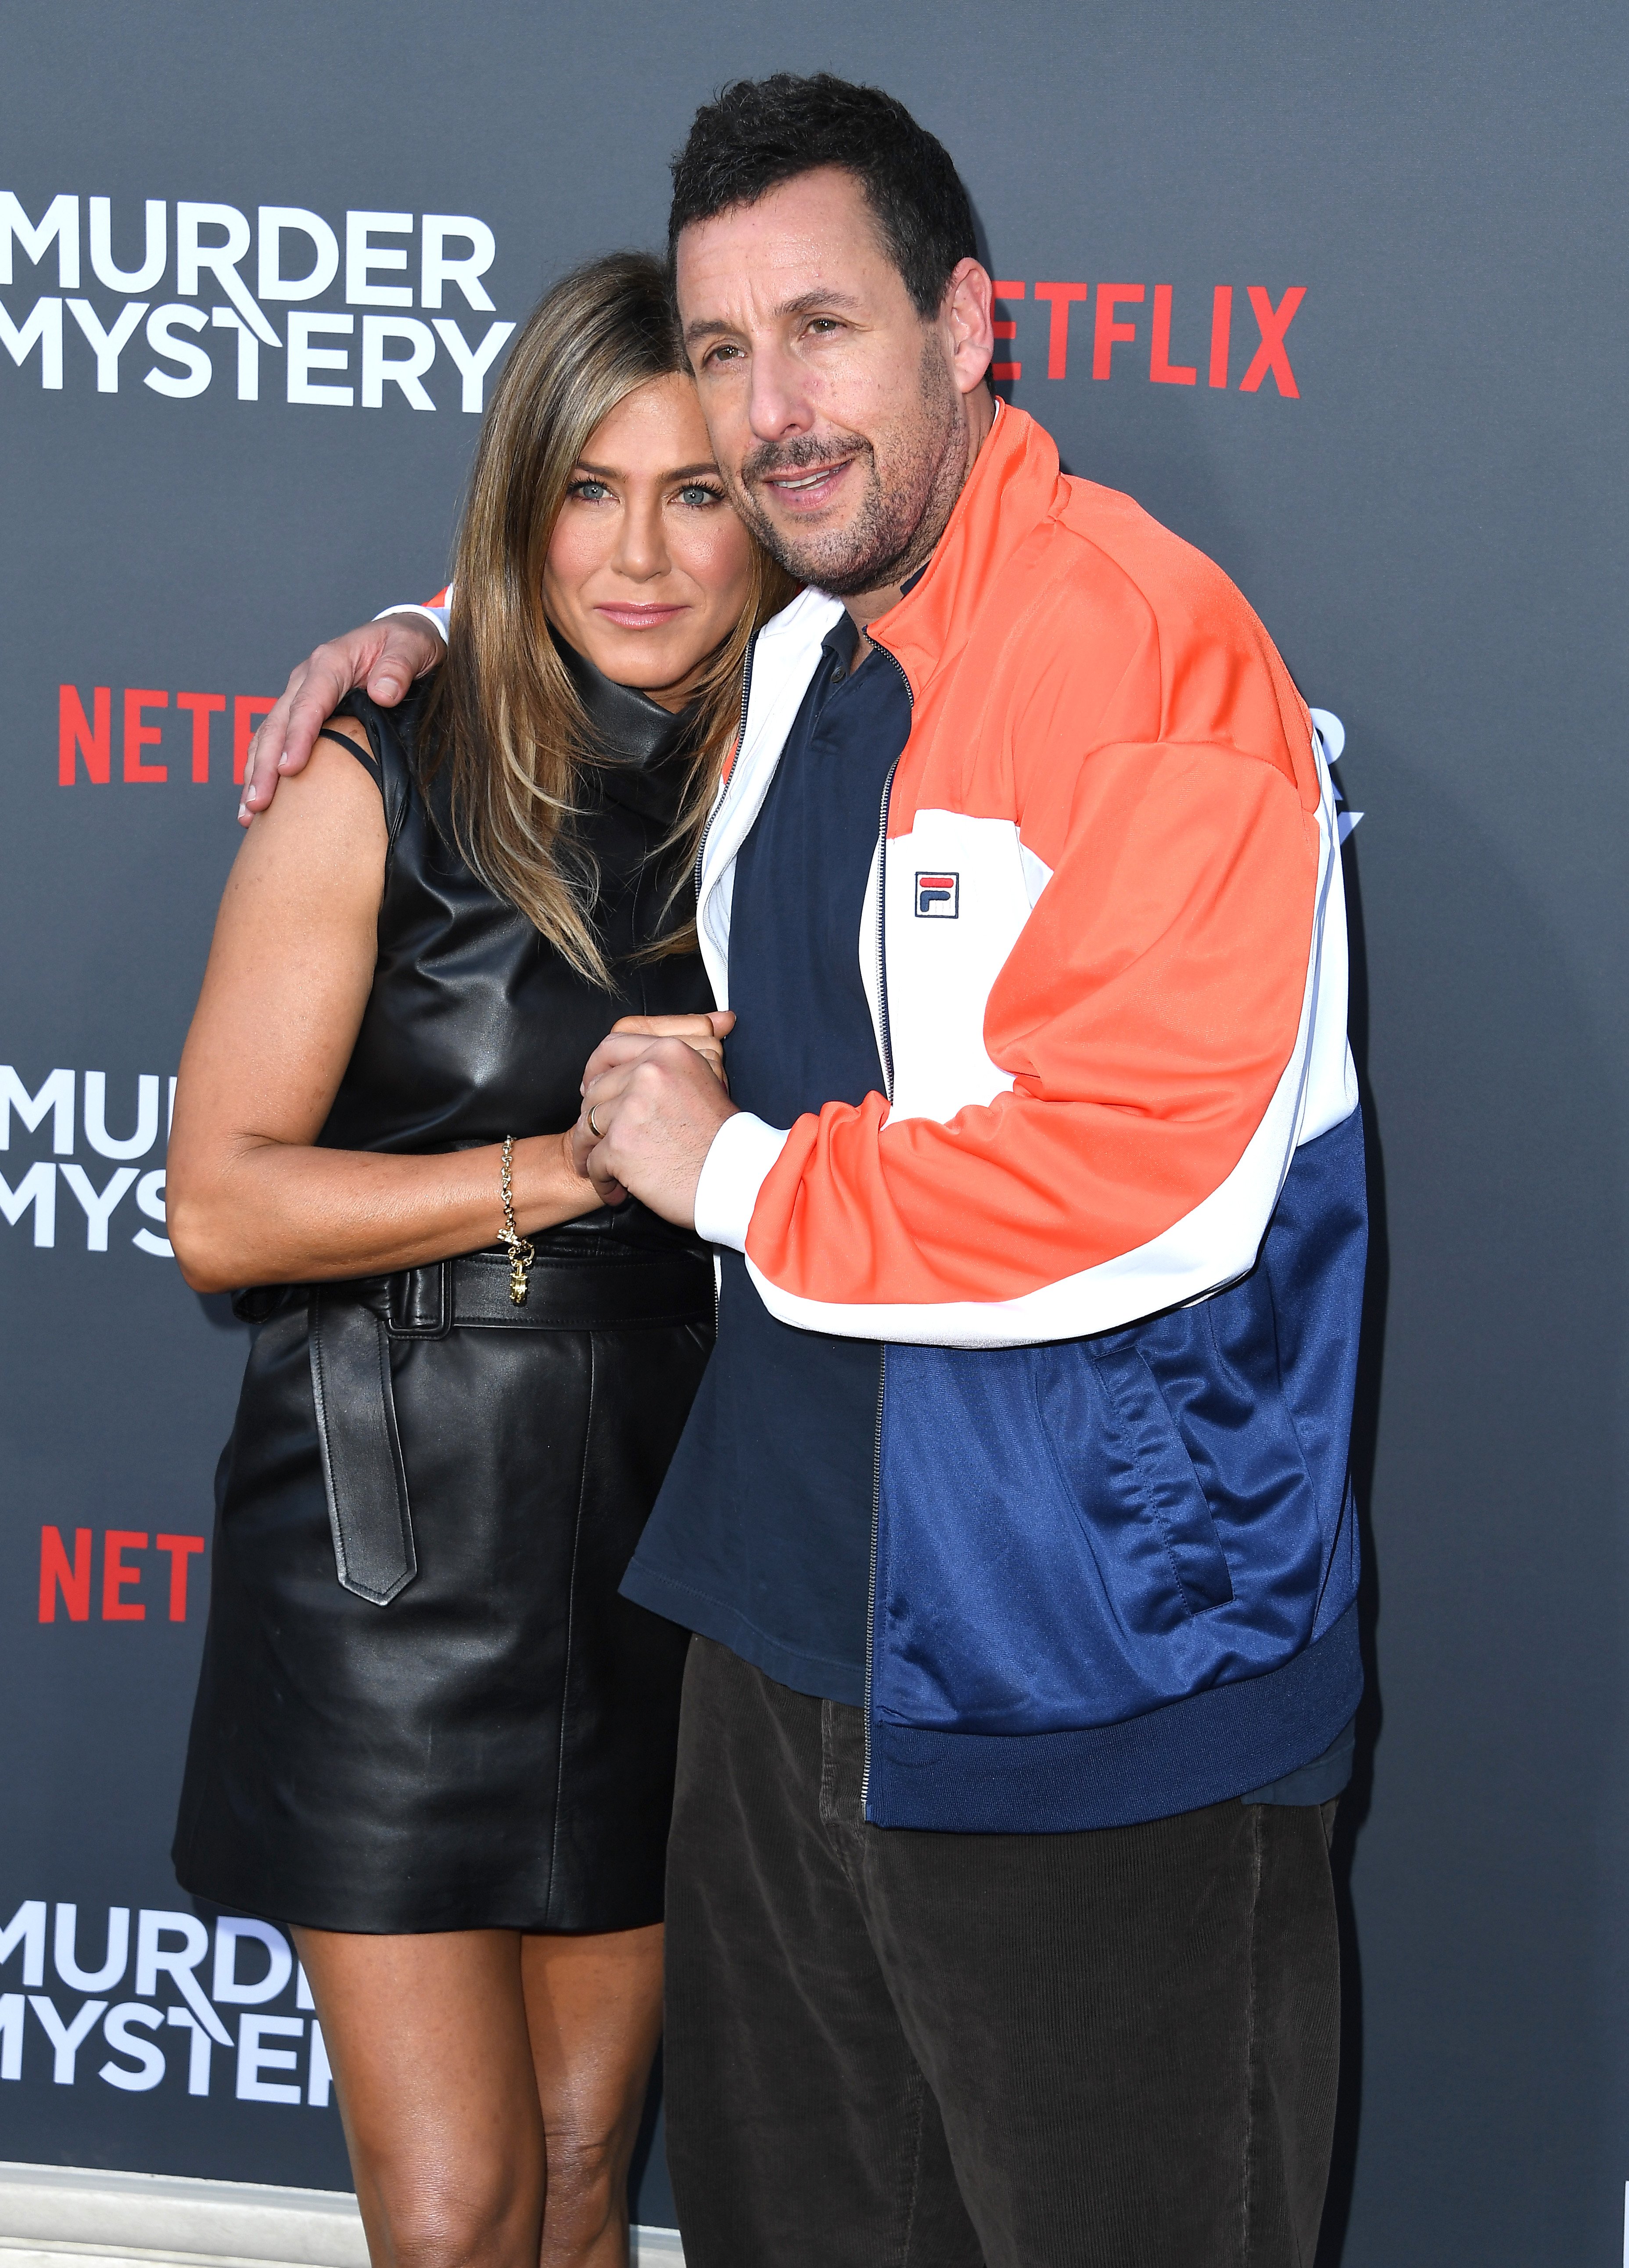 Jennifer Aniston and Adam Sandler at the LA premiere of "Murder Mystery," 2019 | Photo: Getty Images 